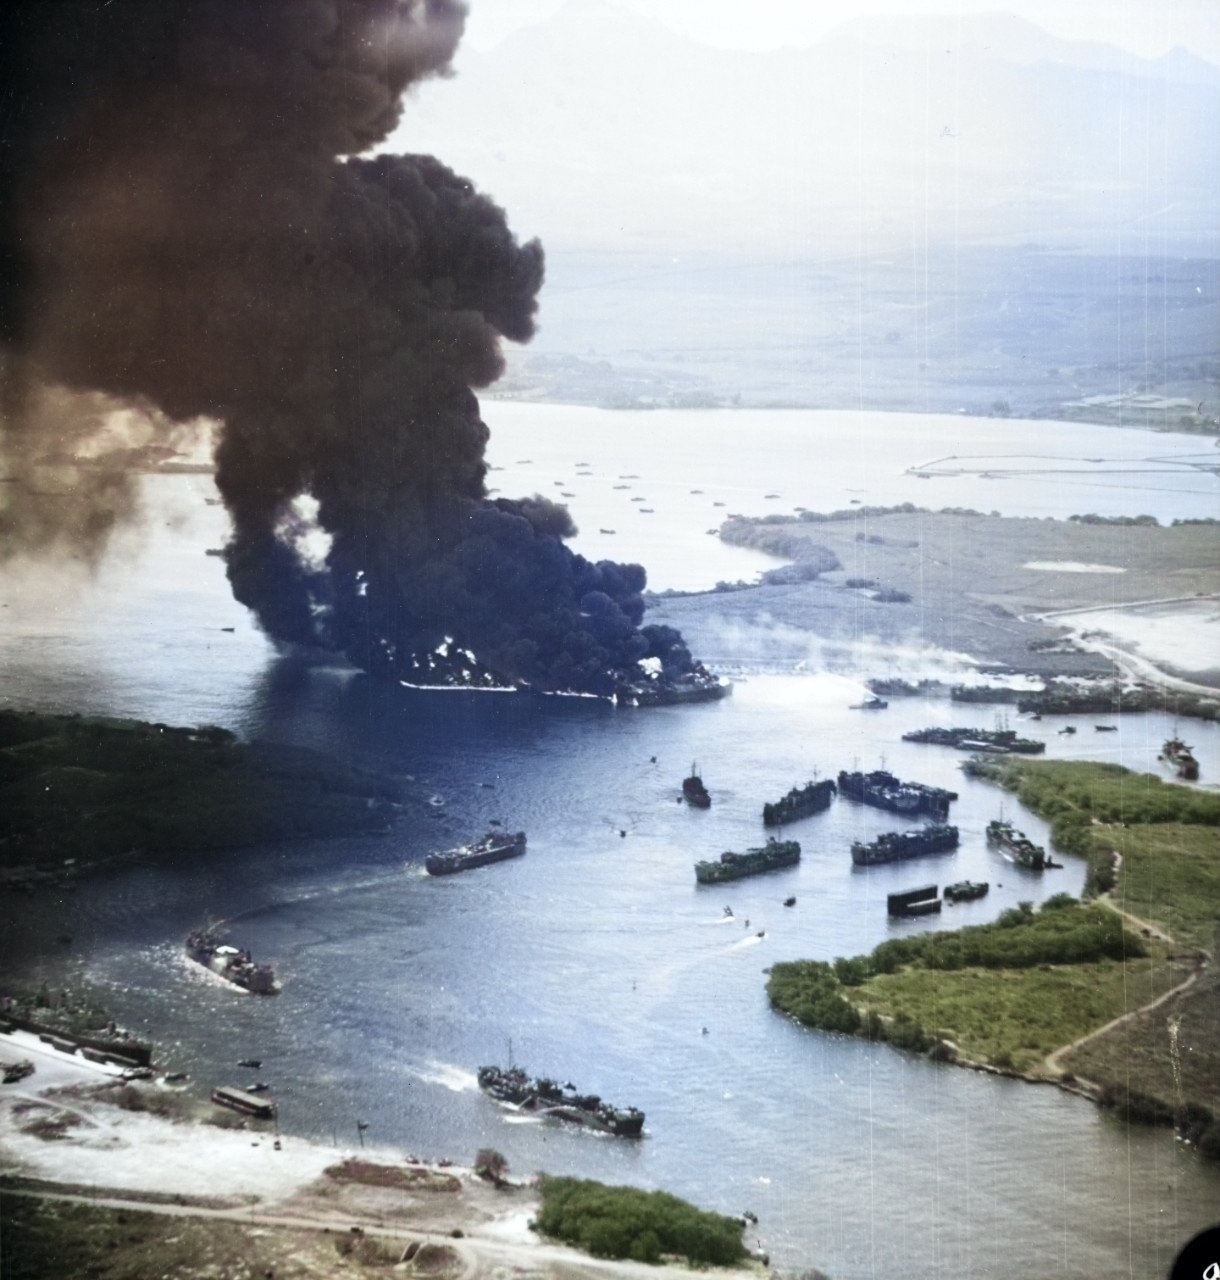 Fully laden United States Navy LSTs burning furiously while other ships flee in Pearl Harbor’s West Loch after massive chain-reaction explosions in what became known as the West Loch Disaster, 21 May 1944. [Colorized by WW2DB]